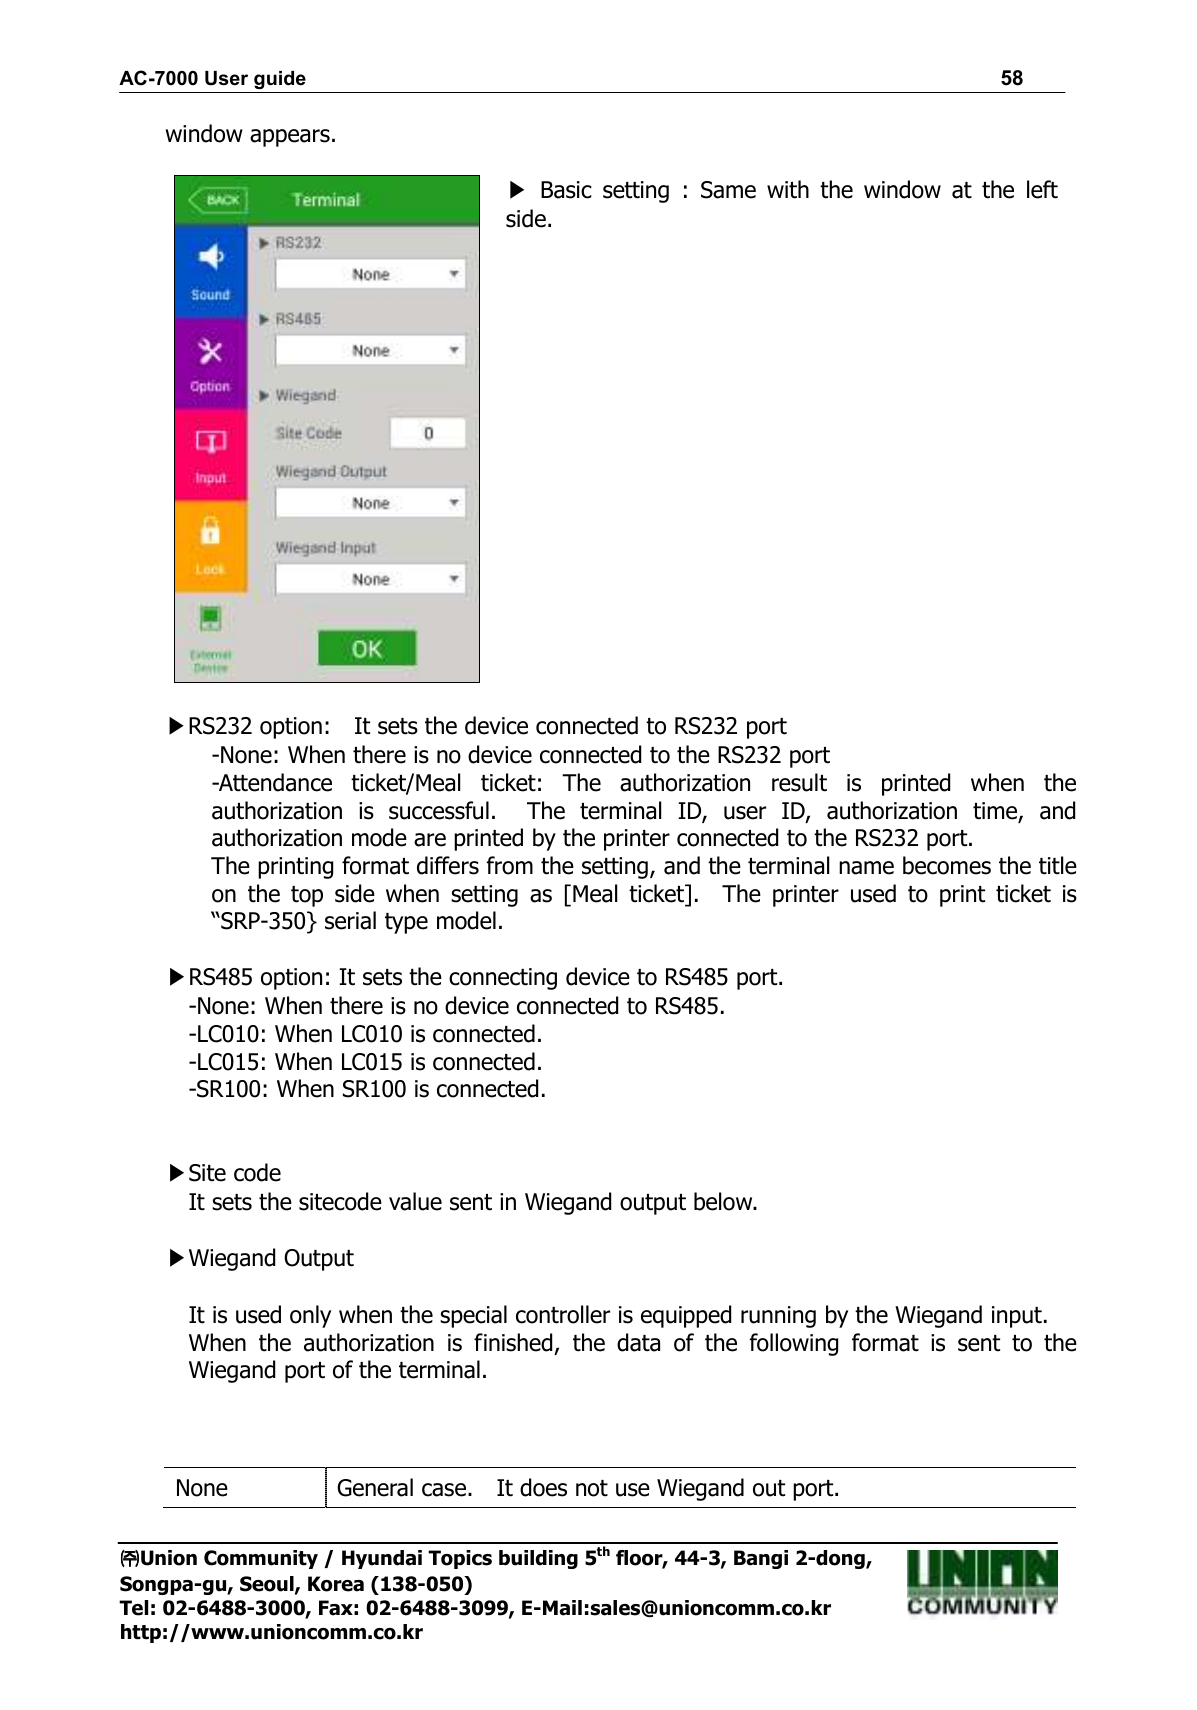 AC-7000 User guide                                                                      58 ㈜㈜㈜㈜Union Community / Hyundai Topics building 5th floor, 44-3, Bangi 2-dong,   Songpa-gu, Seoul, Korea (138-050) Tel: 02-6488-3000, Fax: 02-6488-3099, E-Mail:sales@unioncomm.co.kr http://www.unioncomm.co.kr window appears.   ▶  Basic  setting  :  Same  with  the  window  at  the  left side.   ▶RS232 option:    It sets the device connected to RS232 port -None: When there is no device connected to the RS232 port -Attendance  ticket/Meal  ticket:  The  authorization  result  is  printed  when  the authorization  is  successful.    The  terminal  ID,  user  ID,  authorization  time,  and authorization mode are printed by the printer connected to the RS232 port. The printing format differs from the setting, and the terminal name becomes the title on  the  top  side  when  setting  as  [Meal  ticket].    The  printer  used  to  print  ticket  is “SRP-350} serial type model.  ▶RS485 option: It sets the connecting device to RS485 port. -None: When there is no device connected to RS485. -LC010: When LC010 is connected. -LC015: When LC015 is connected. -SR100: When SR100 is connected.     ▶Site code It sets the sitecode value sent in Wiegand output below.  ▶Wiegand Output  It is used only when the special controller is equipped running by the Wiegand input. When  the  authorization  is  finished,  the  data  of  the  following  format  is  sent  to  the Wiegand port of the terminal.    None General case.    It does not use Wiegand out port. 